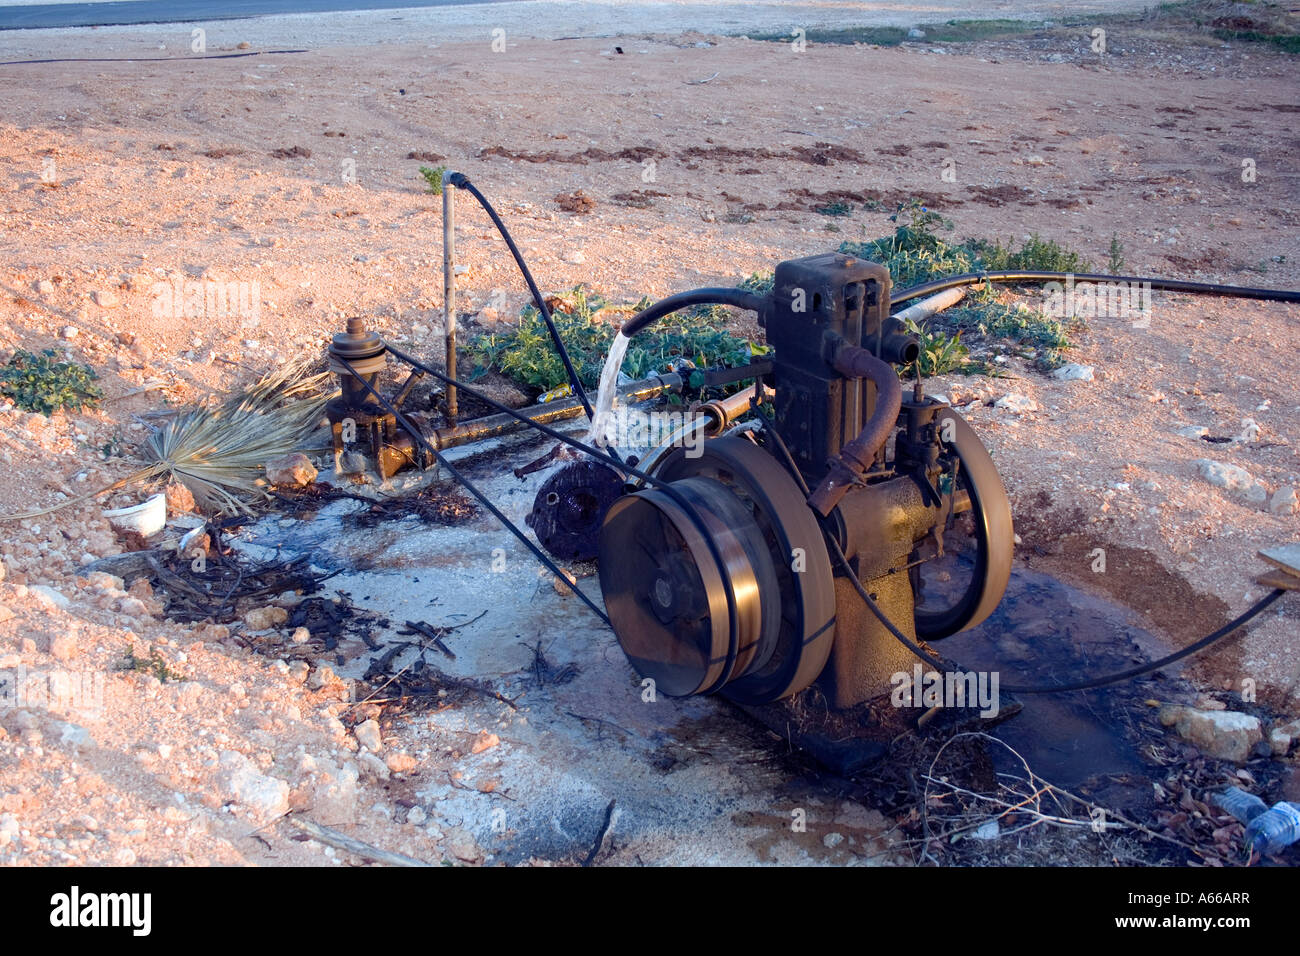 Water Pumps For Irrigation Cyprus 4